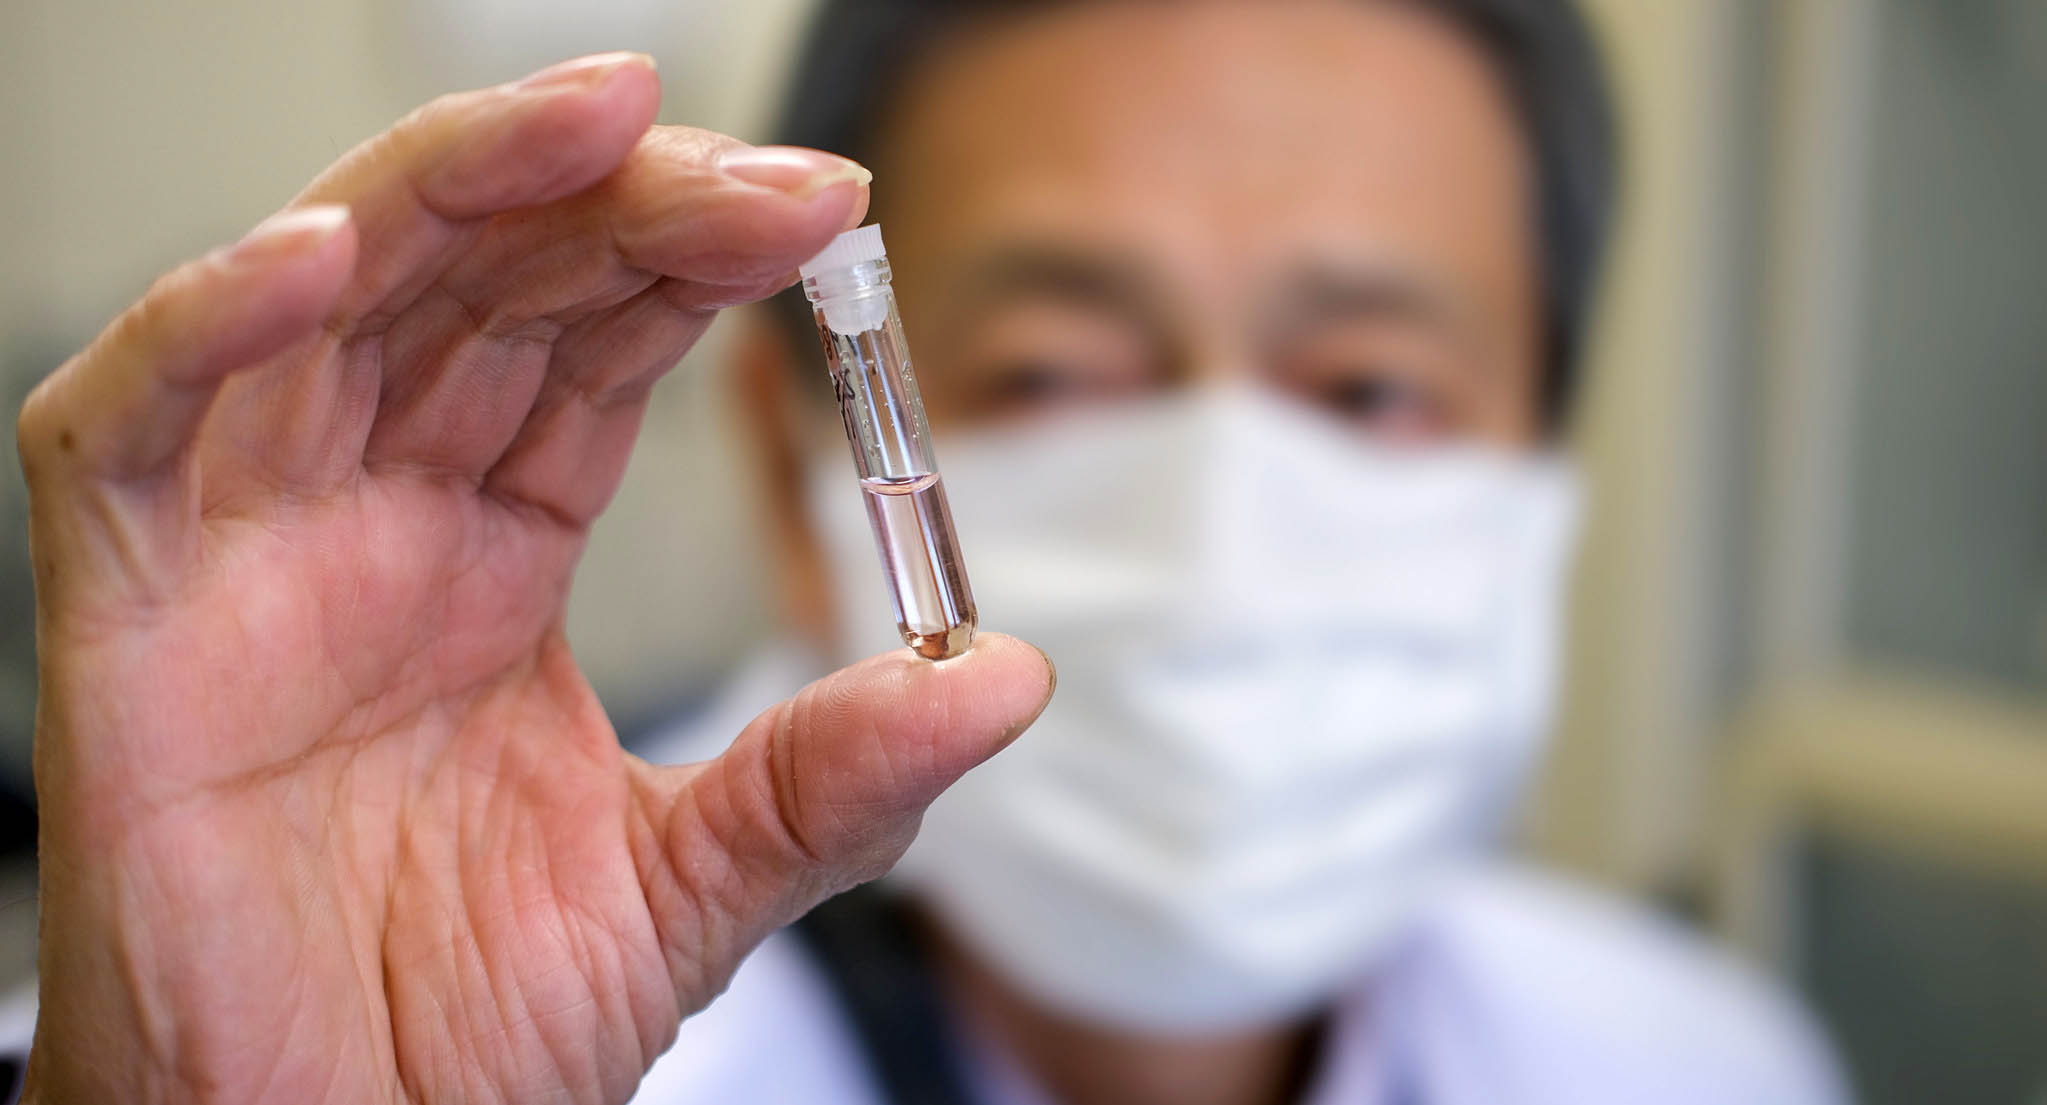 Japanese doctor holding small vial in front of blurred face